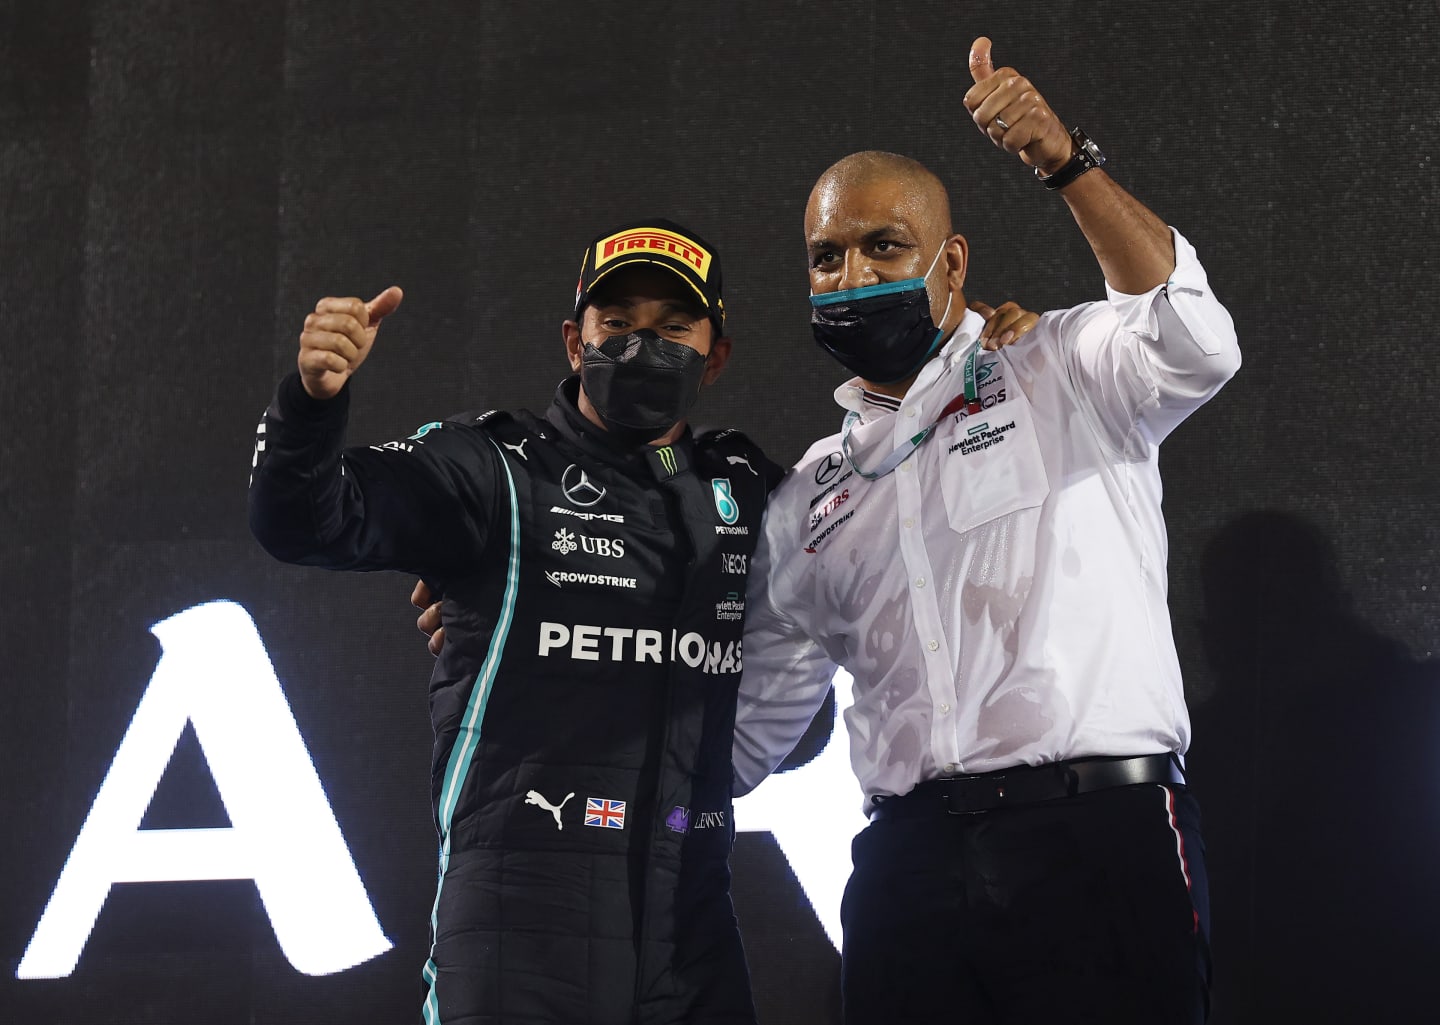 BAHRAIN, BAHRAIN - MARCH 28: Race winner Lewis Hamilton of Great Britain and Mercedes GP and Russell Braithwaite, Chief Financial Officer of Mercedes GP, celebrate on the podium during the F1 Grand Prix of Bahrain at Bahrain International Circuit on March 28, 2021 in Bahrain, Bahrain. (Photo by Lars Baron/Getty Images)